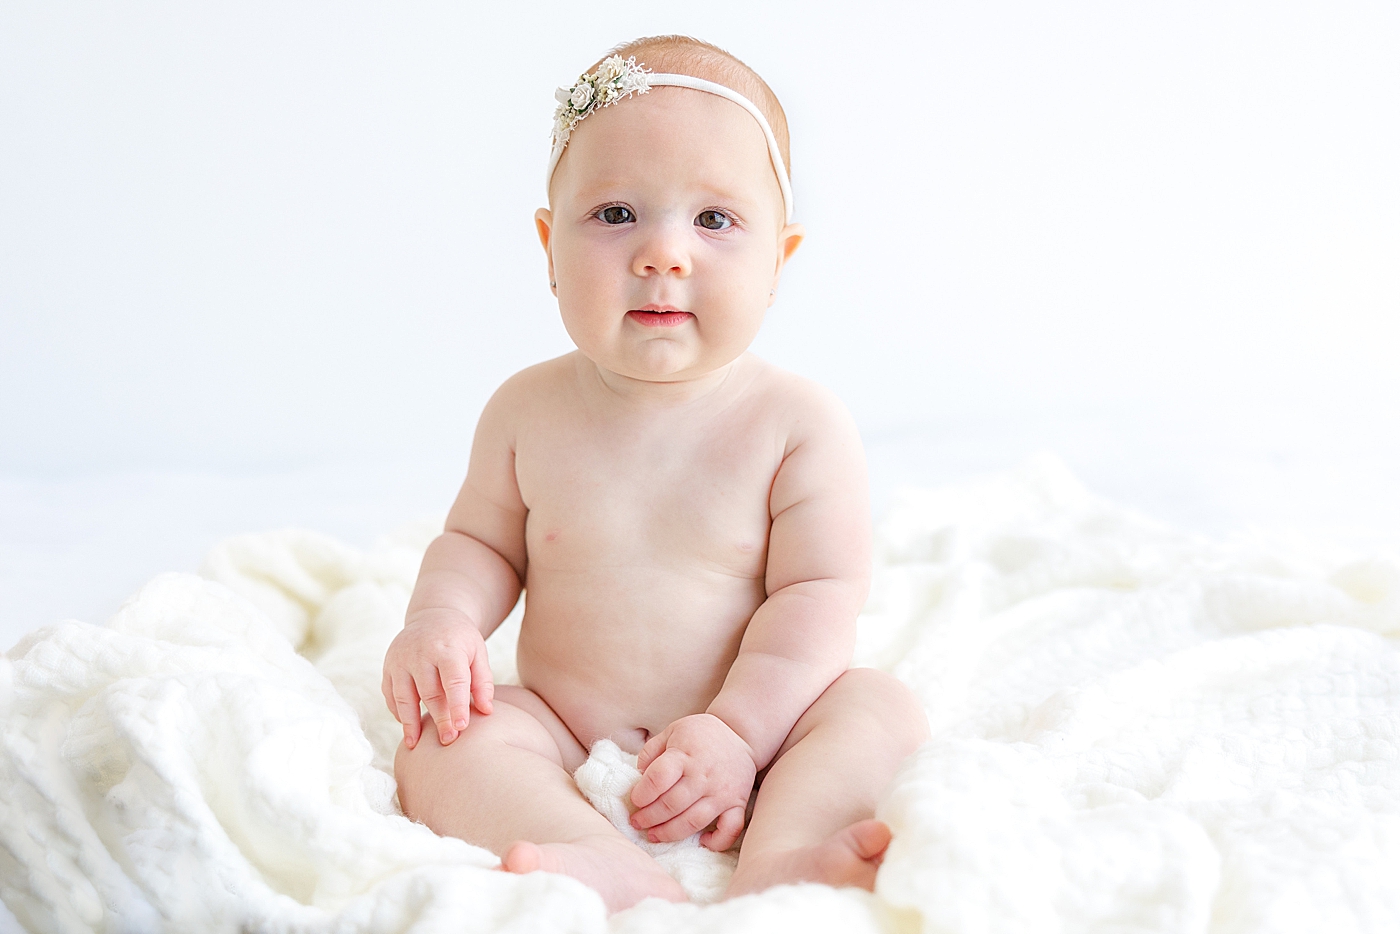 Baby girl in a headband sitting on a blanket | Image by Sana Ahmed Photography